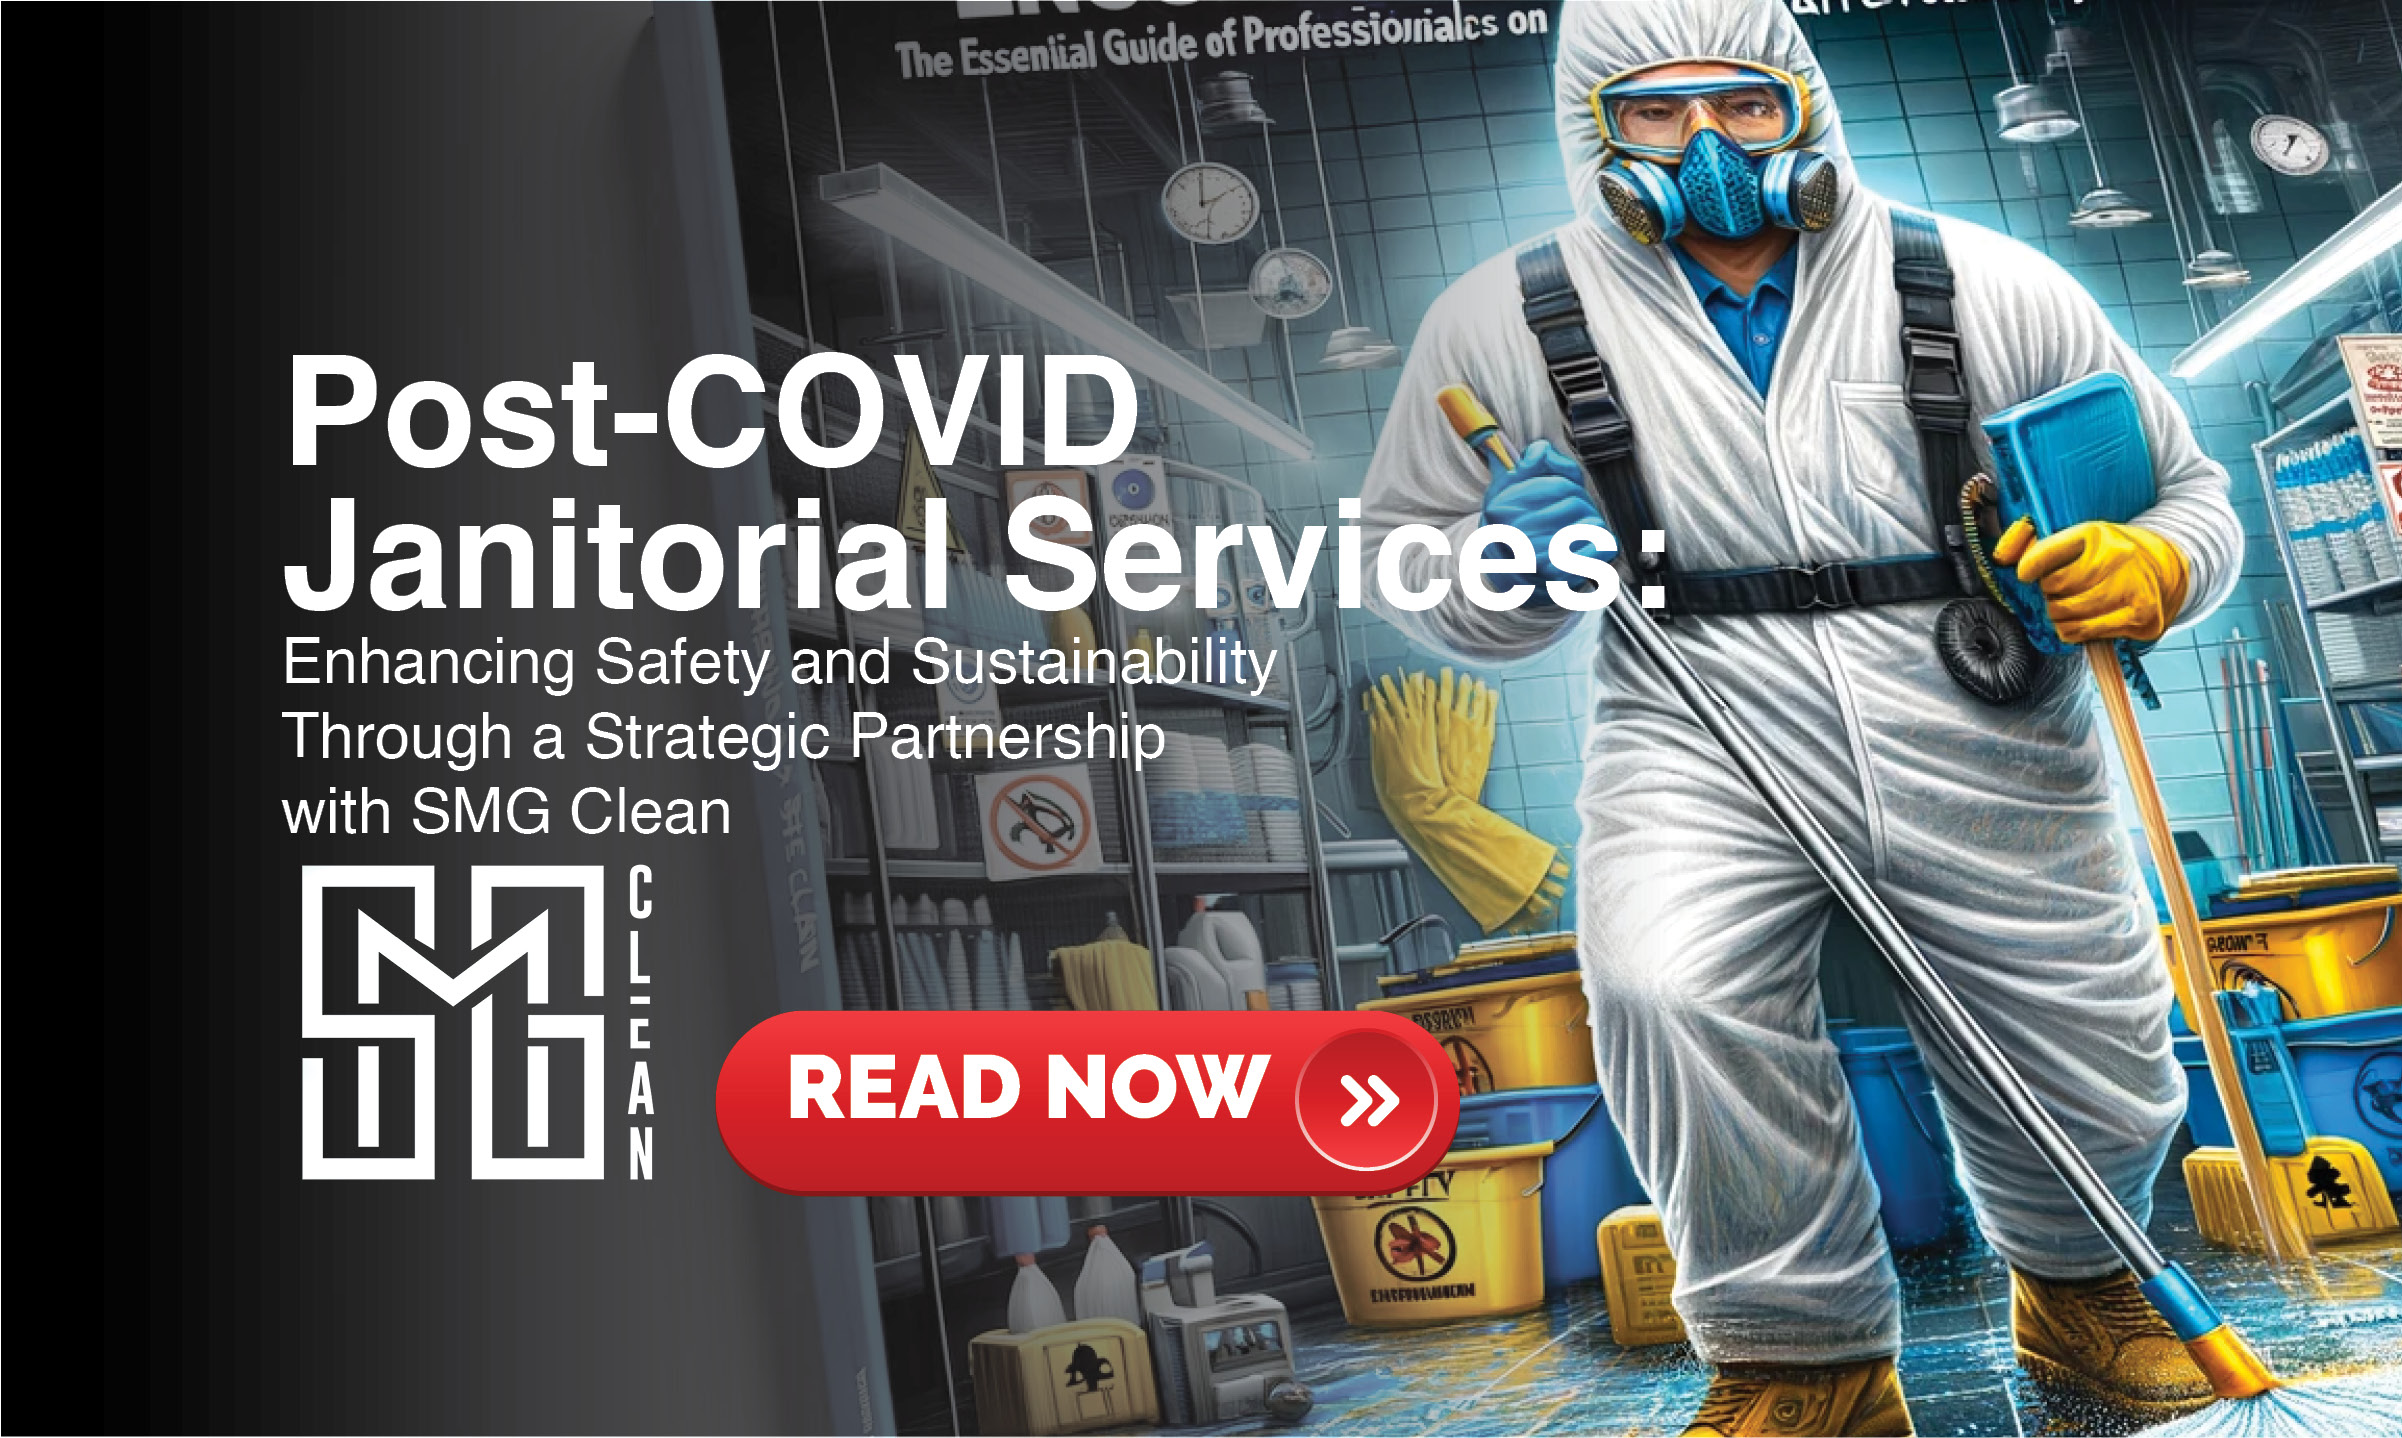 Post-COVID Janitorial Services